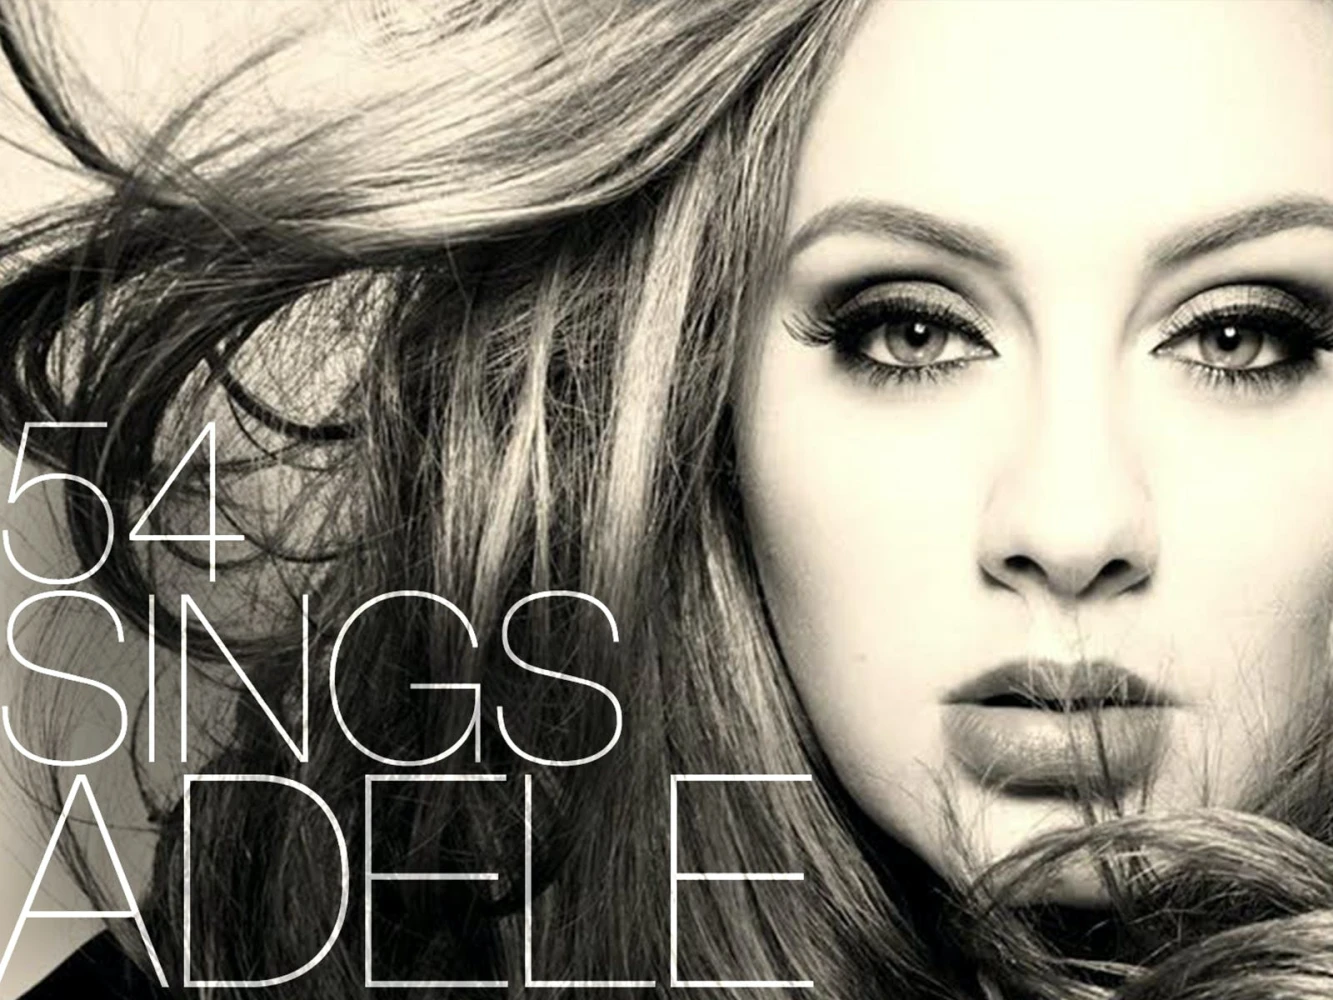 54 Sings Adele: What to expect - 2